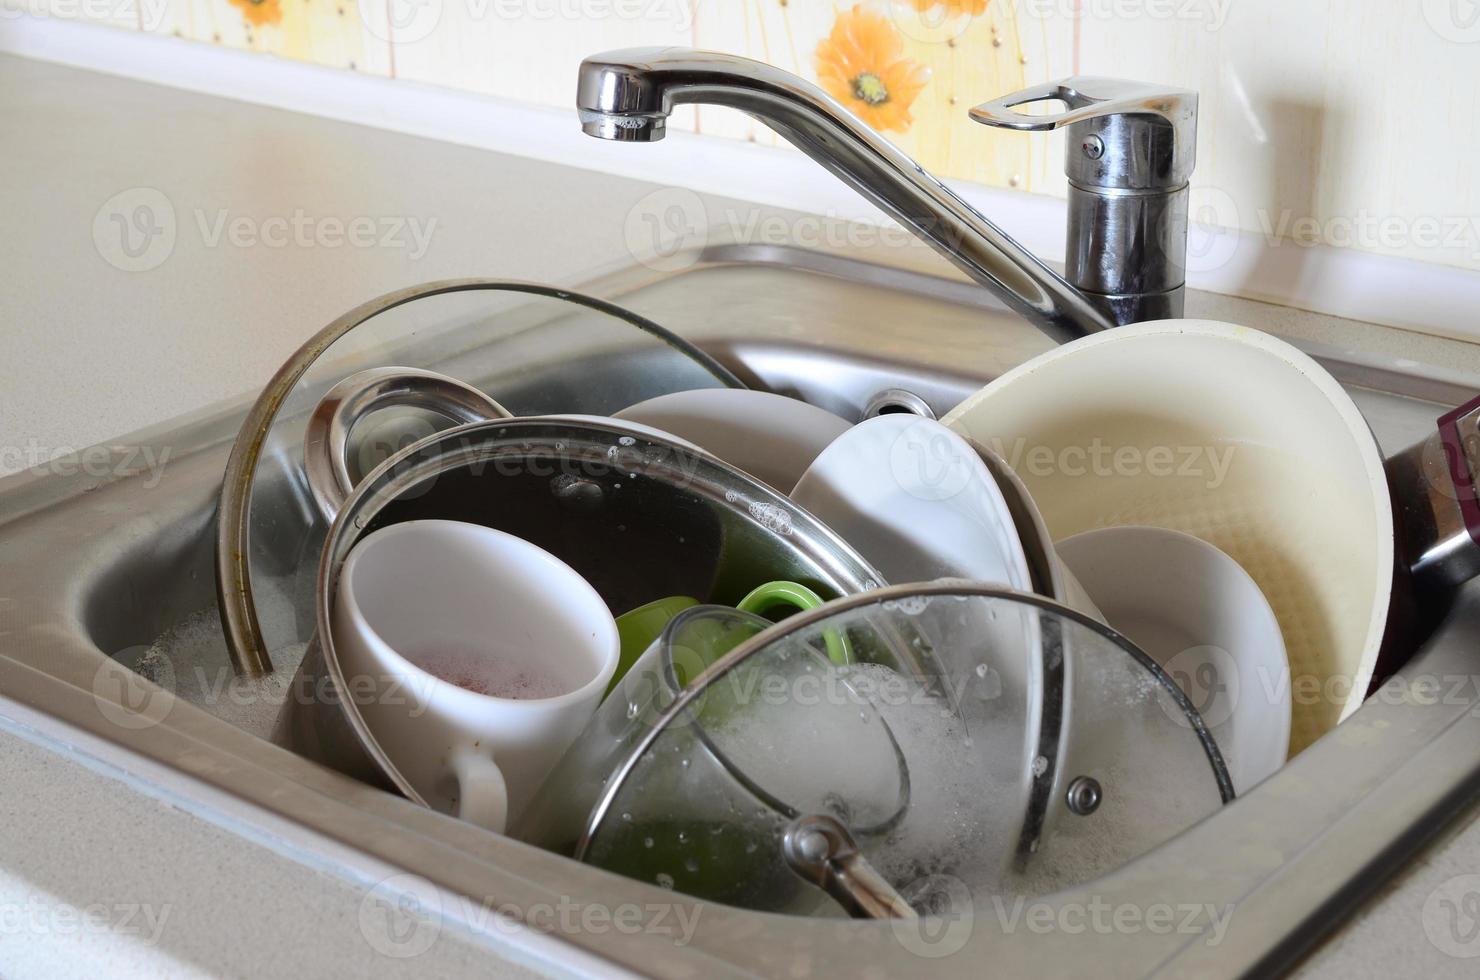 Dirty dishes and unwashed kitchen appliances filled the kitchen sink photo